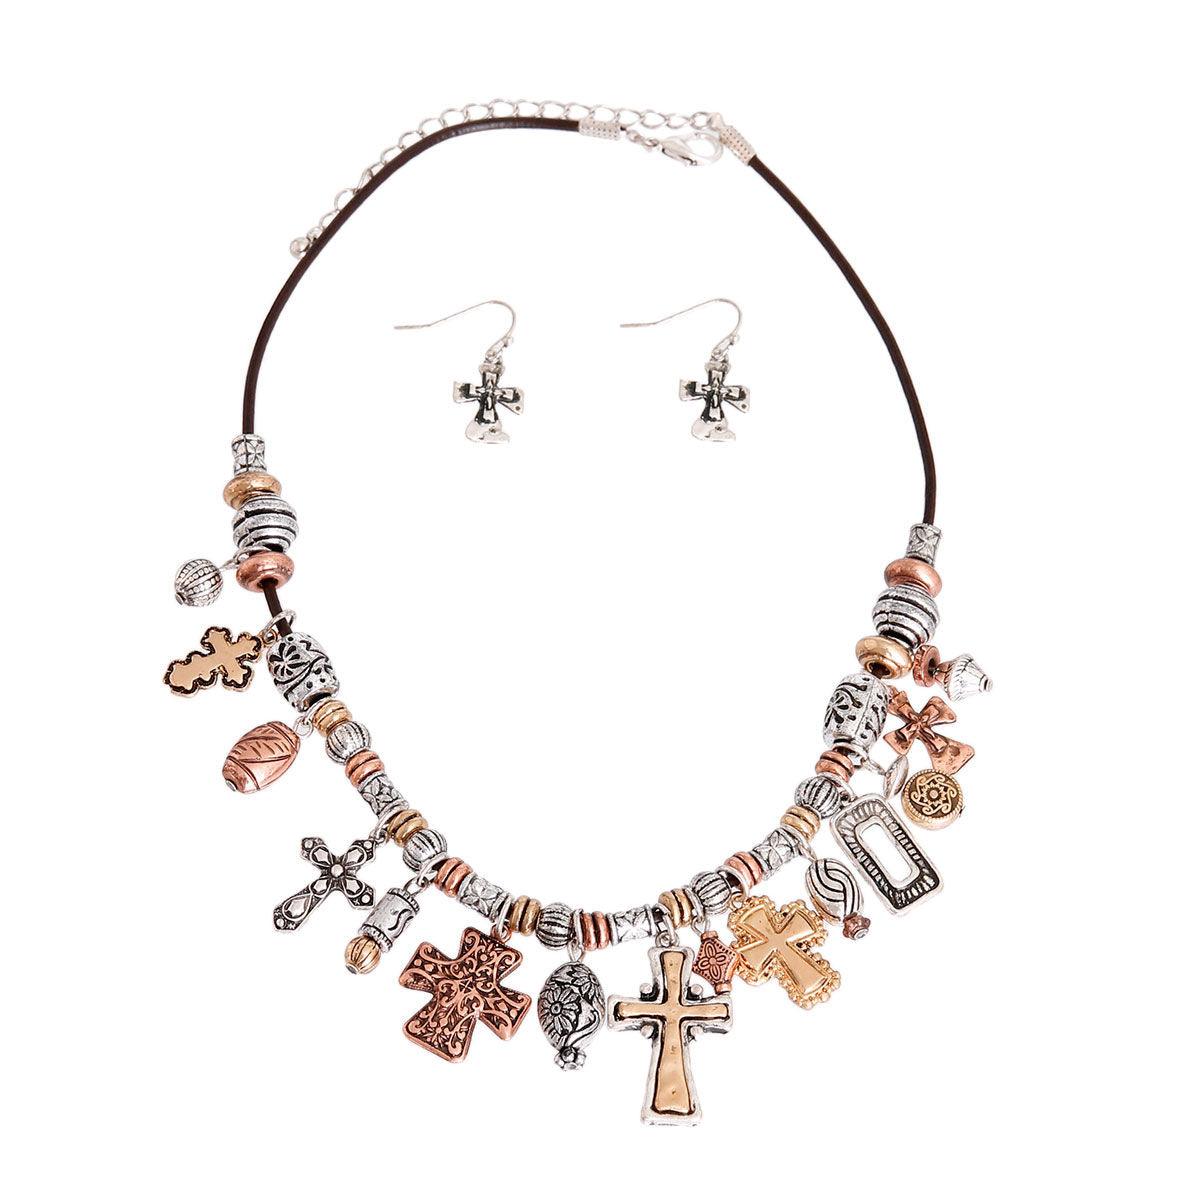 Affordable Mixed Metal Charm Bead Necklace Set: Complete Your Look Today